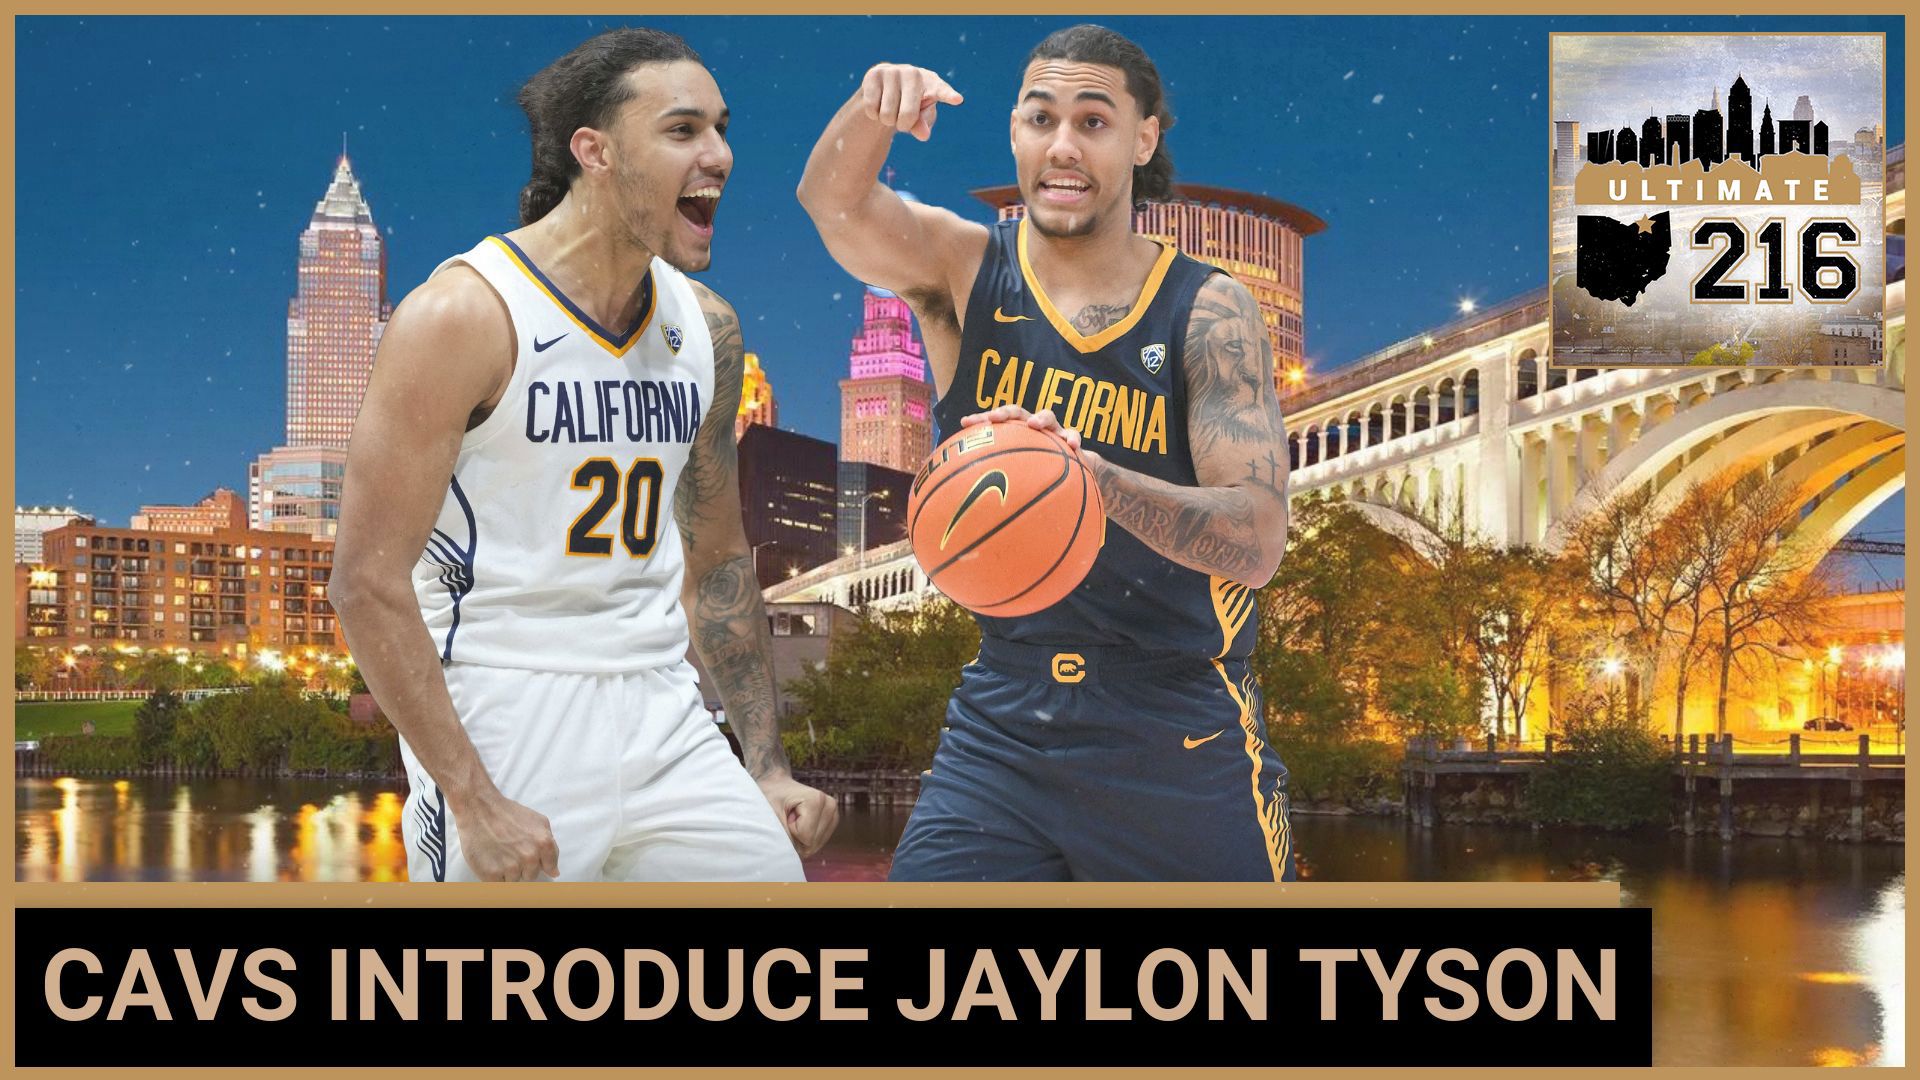 Cleveland Cavaliers introduce rookie Jaylon Tyson, who's already thinking of winning an NBA Championship with the Cavs & making the all-defensive team